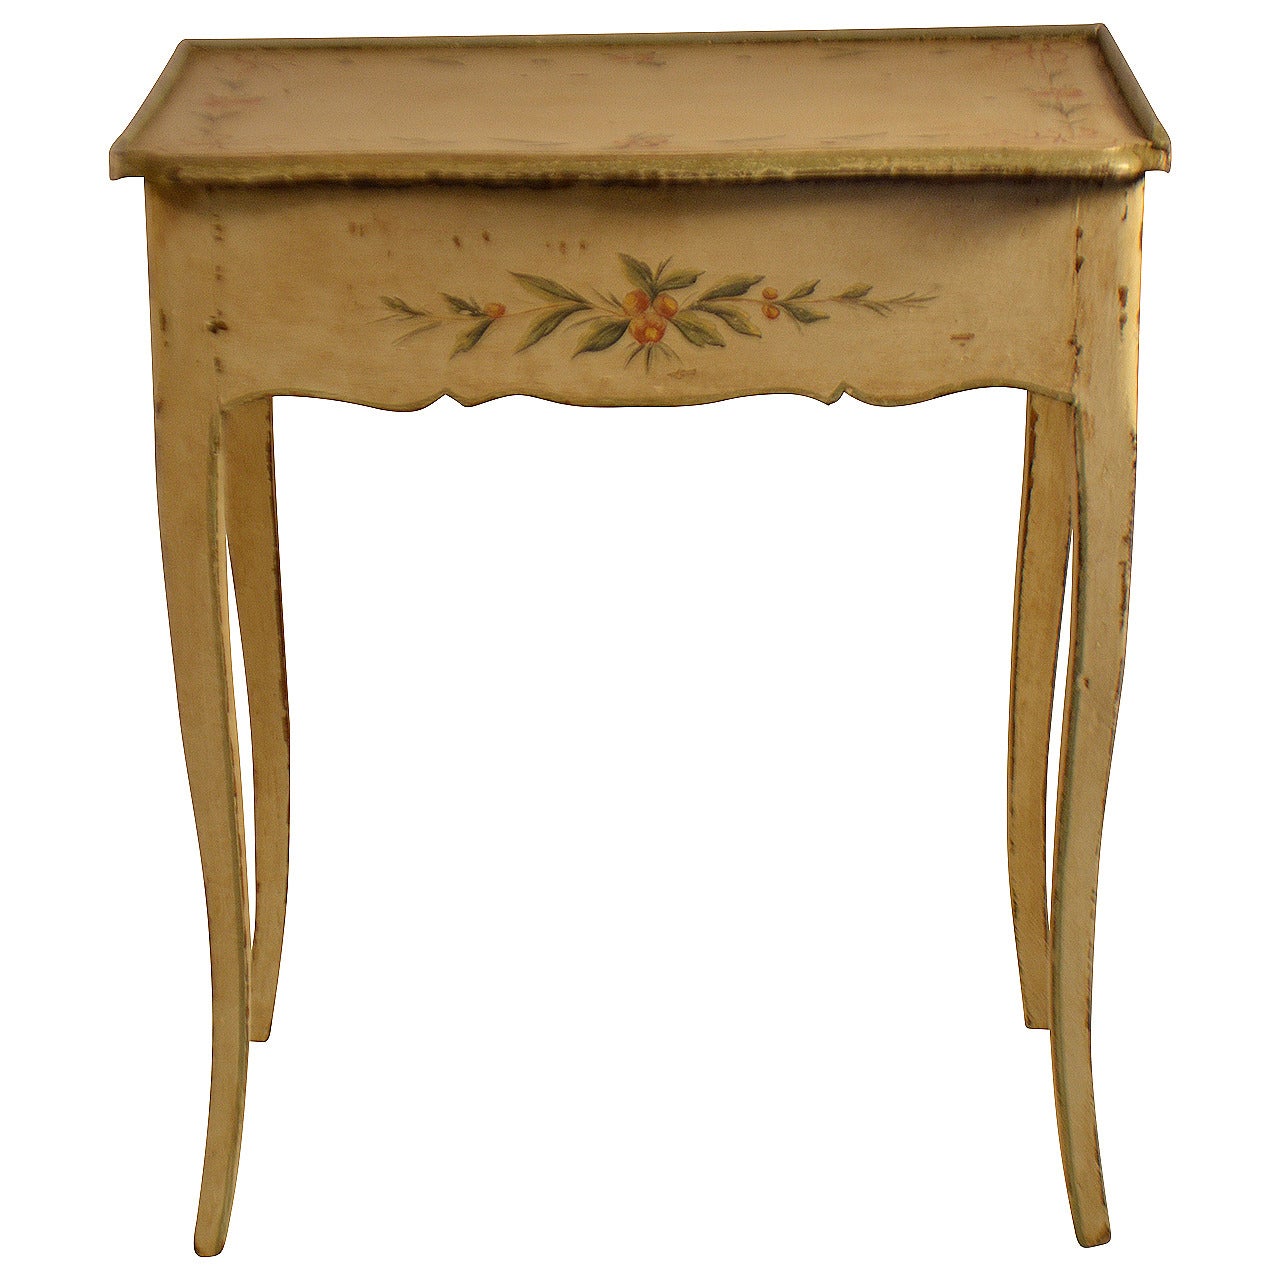 Louis XV Period Dressing Table